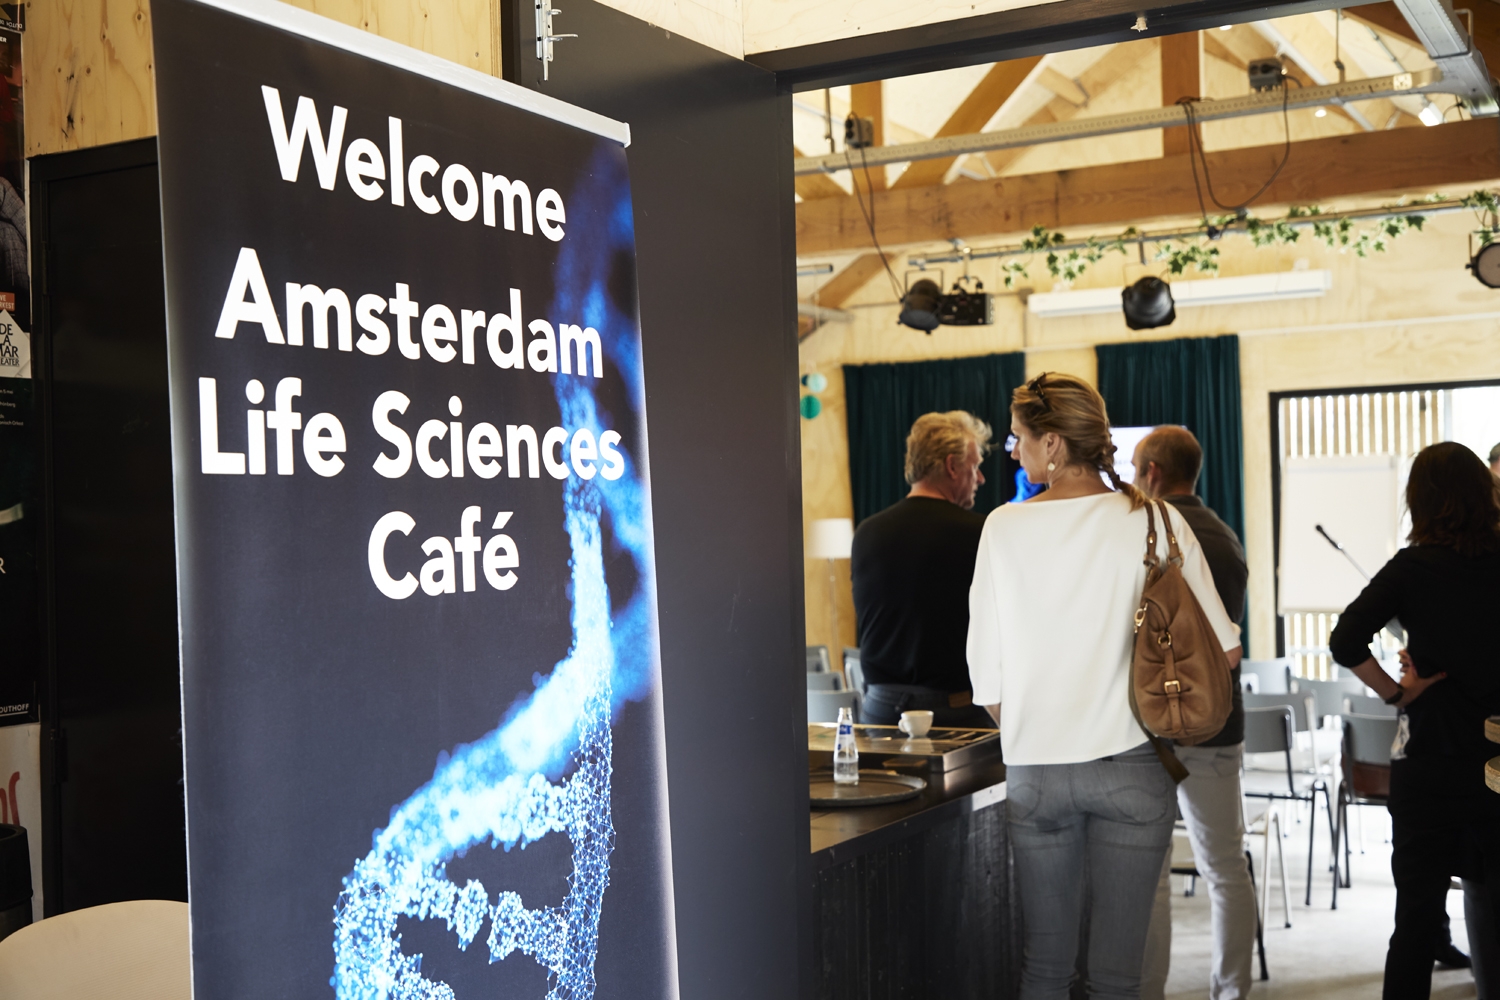 Amsterdam Life Sciences Cafe Interactieve Sessie Met Wouter Bos Amsterdam Economic Board